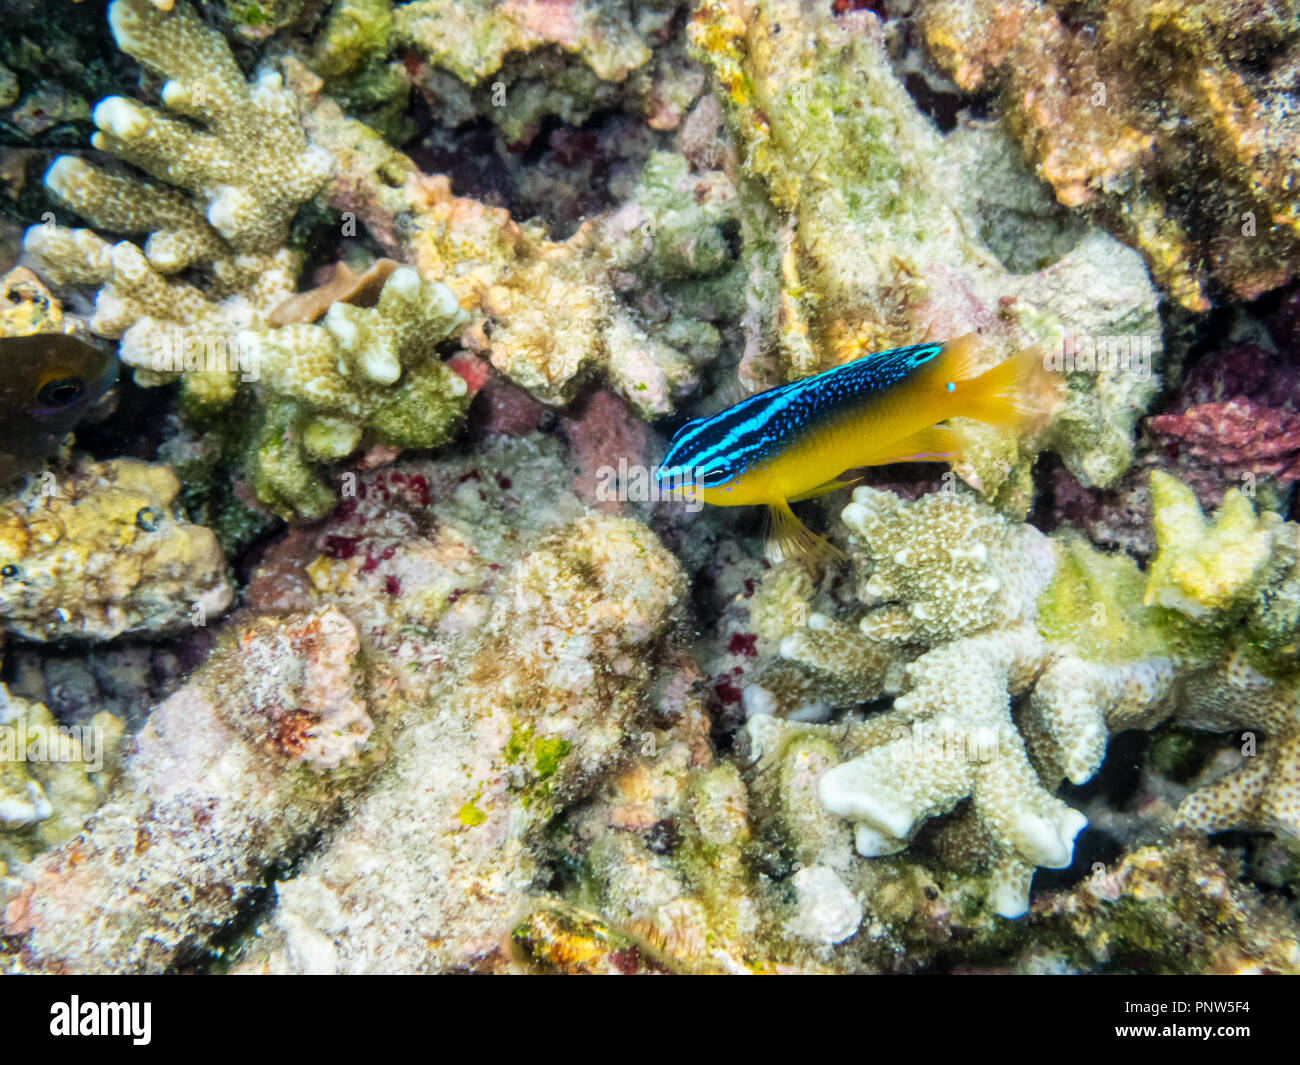 Underwater photos of Stegastes Variabilis or Cocoa Damselfish is a beautiful blue and yellow small sea fish swimming above the coral reefs at Koh Nang Stock Photo